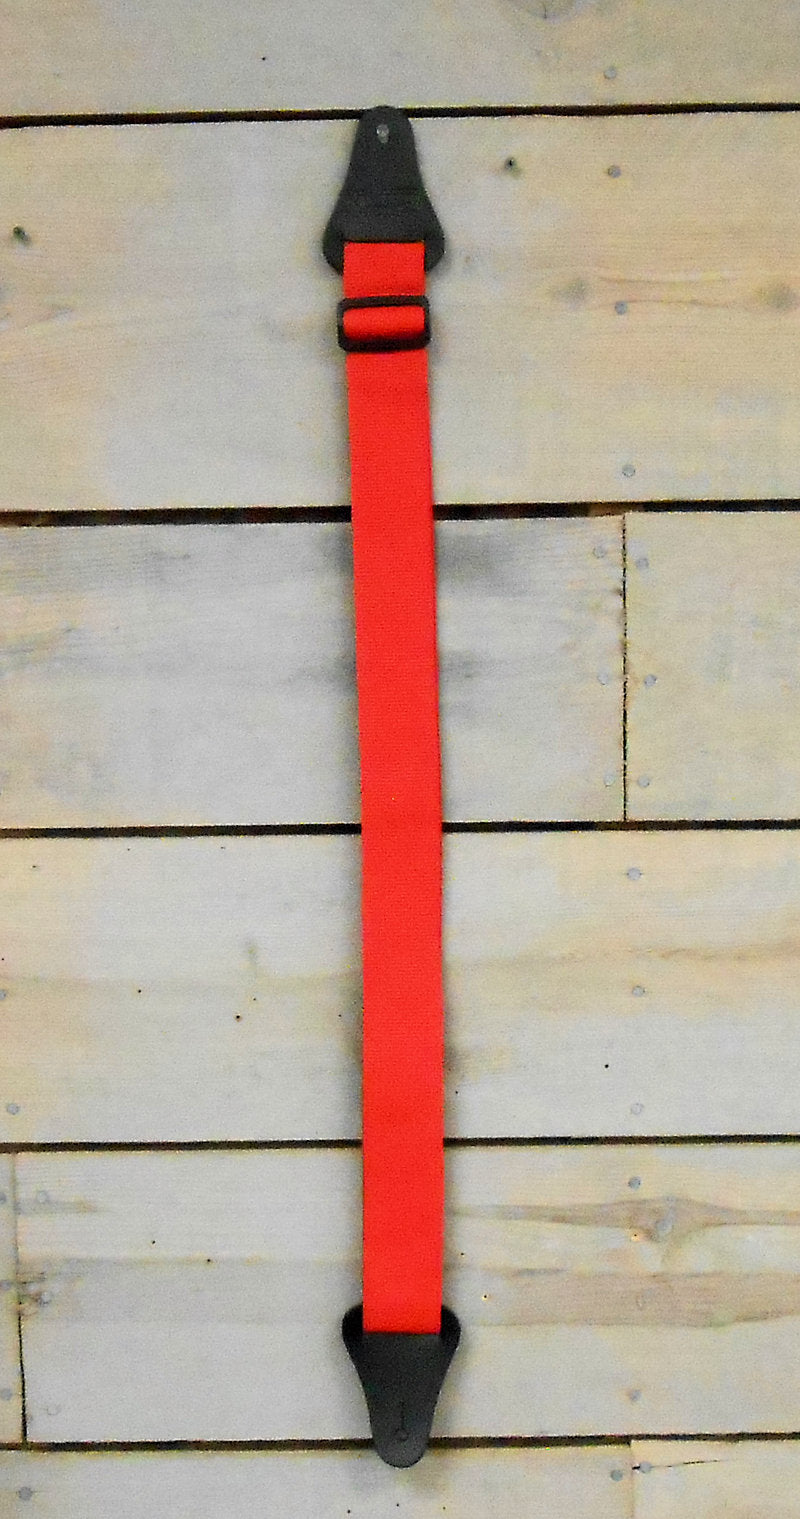 An adjustable Nylon Strap - Red with notched ends hanging on a wooden wall.